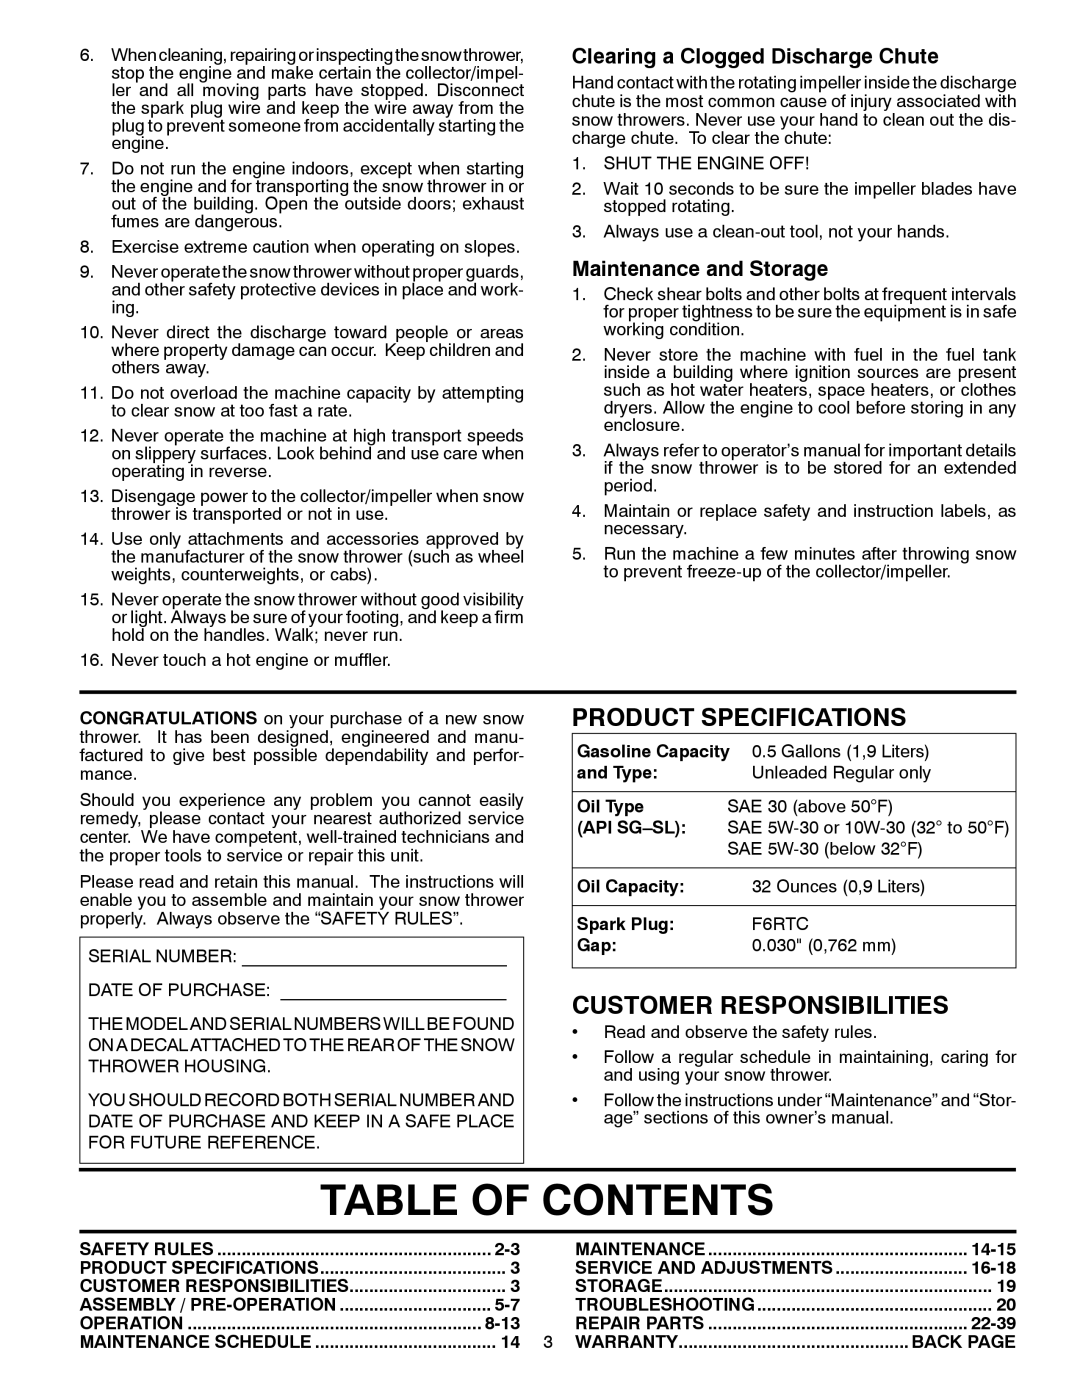 Poulan 435560 Table Of Contents, Product Specifications, Customer Responsibilities, Clearing a Clogged Discharge Chute 